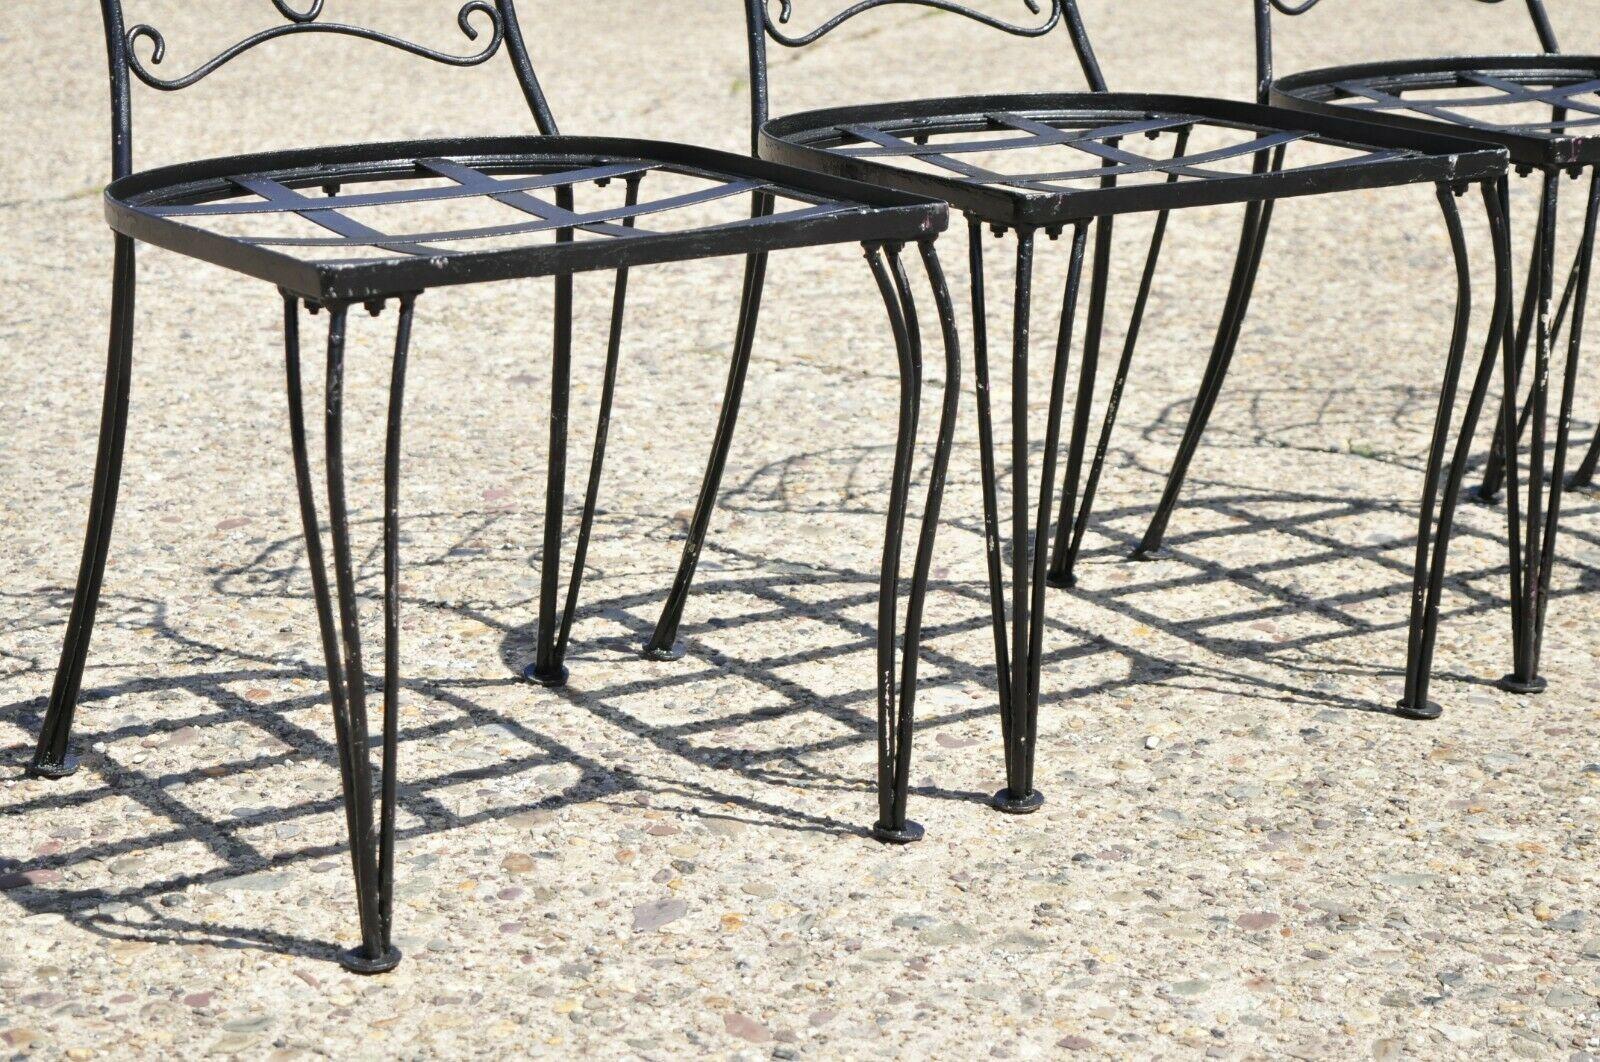 Vintage Wrought Iron Garden Patio Dining Set Square Table 4 Chairs - 5 Pc Set 1